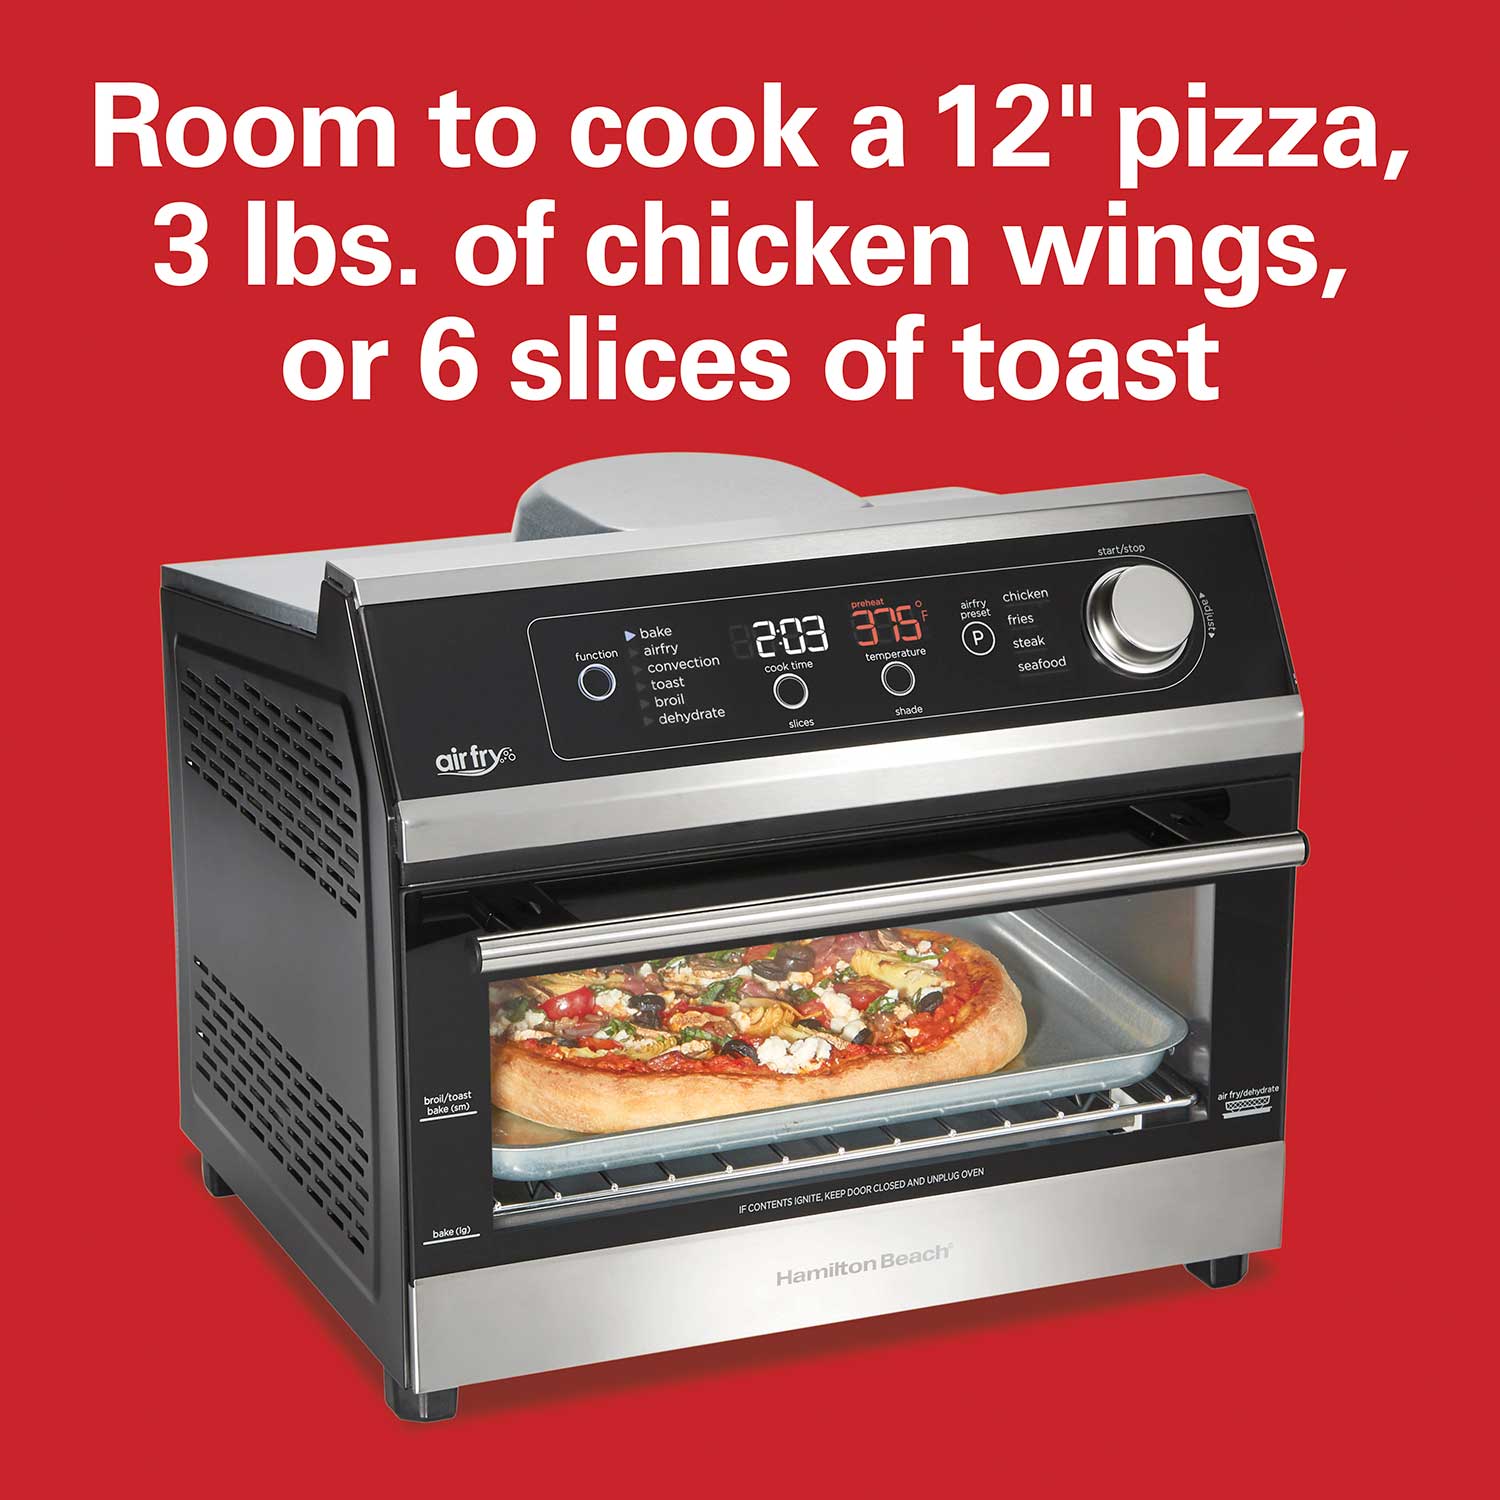 Hamilton Beach Toaster Oven Air Fryer Combo with Large Capacity, Fits 6  Slices or 12” Pizza, 4 Cooking Functions for Convection, Bake, Broil,  Roll-Top